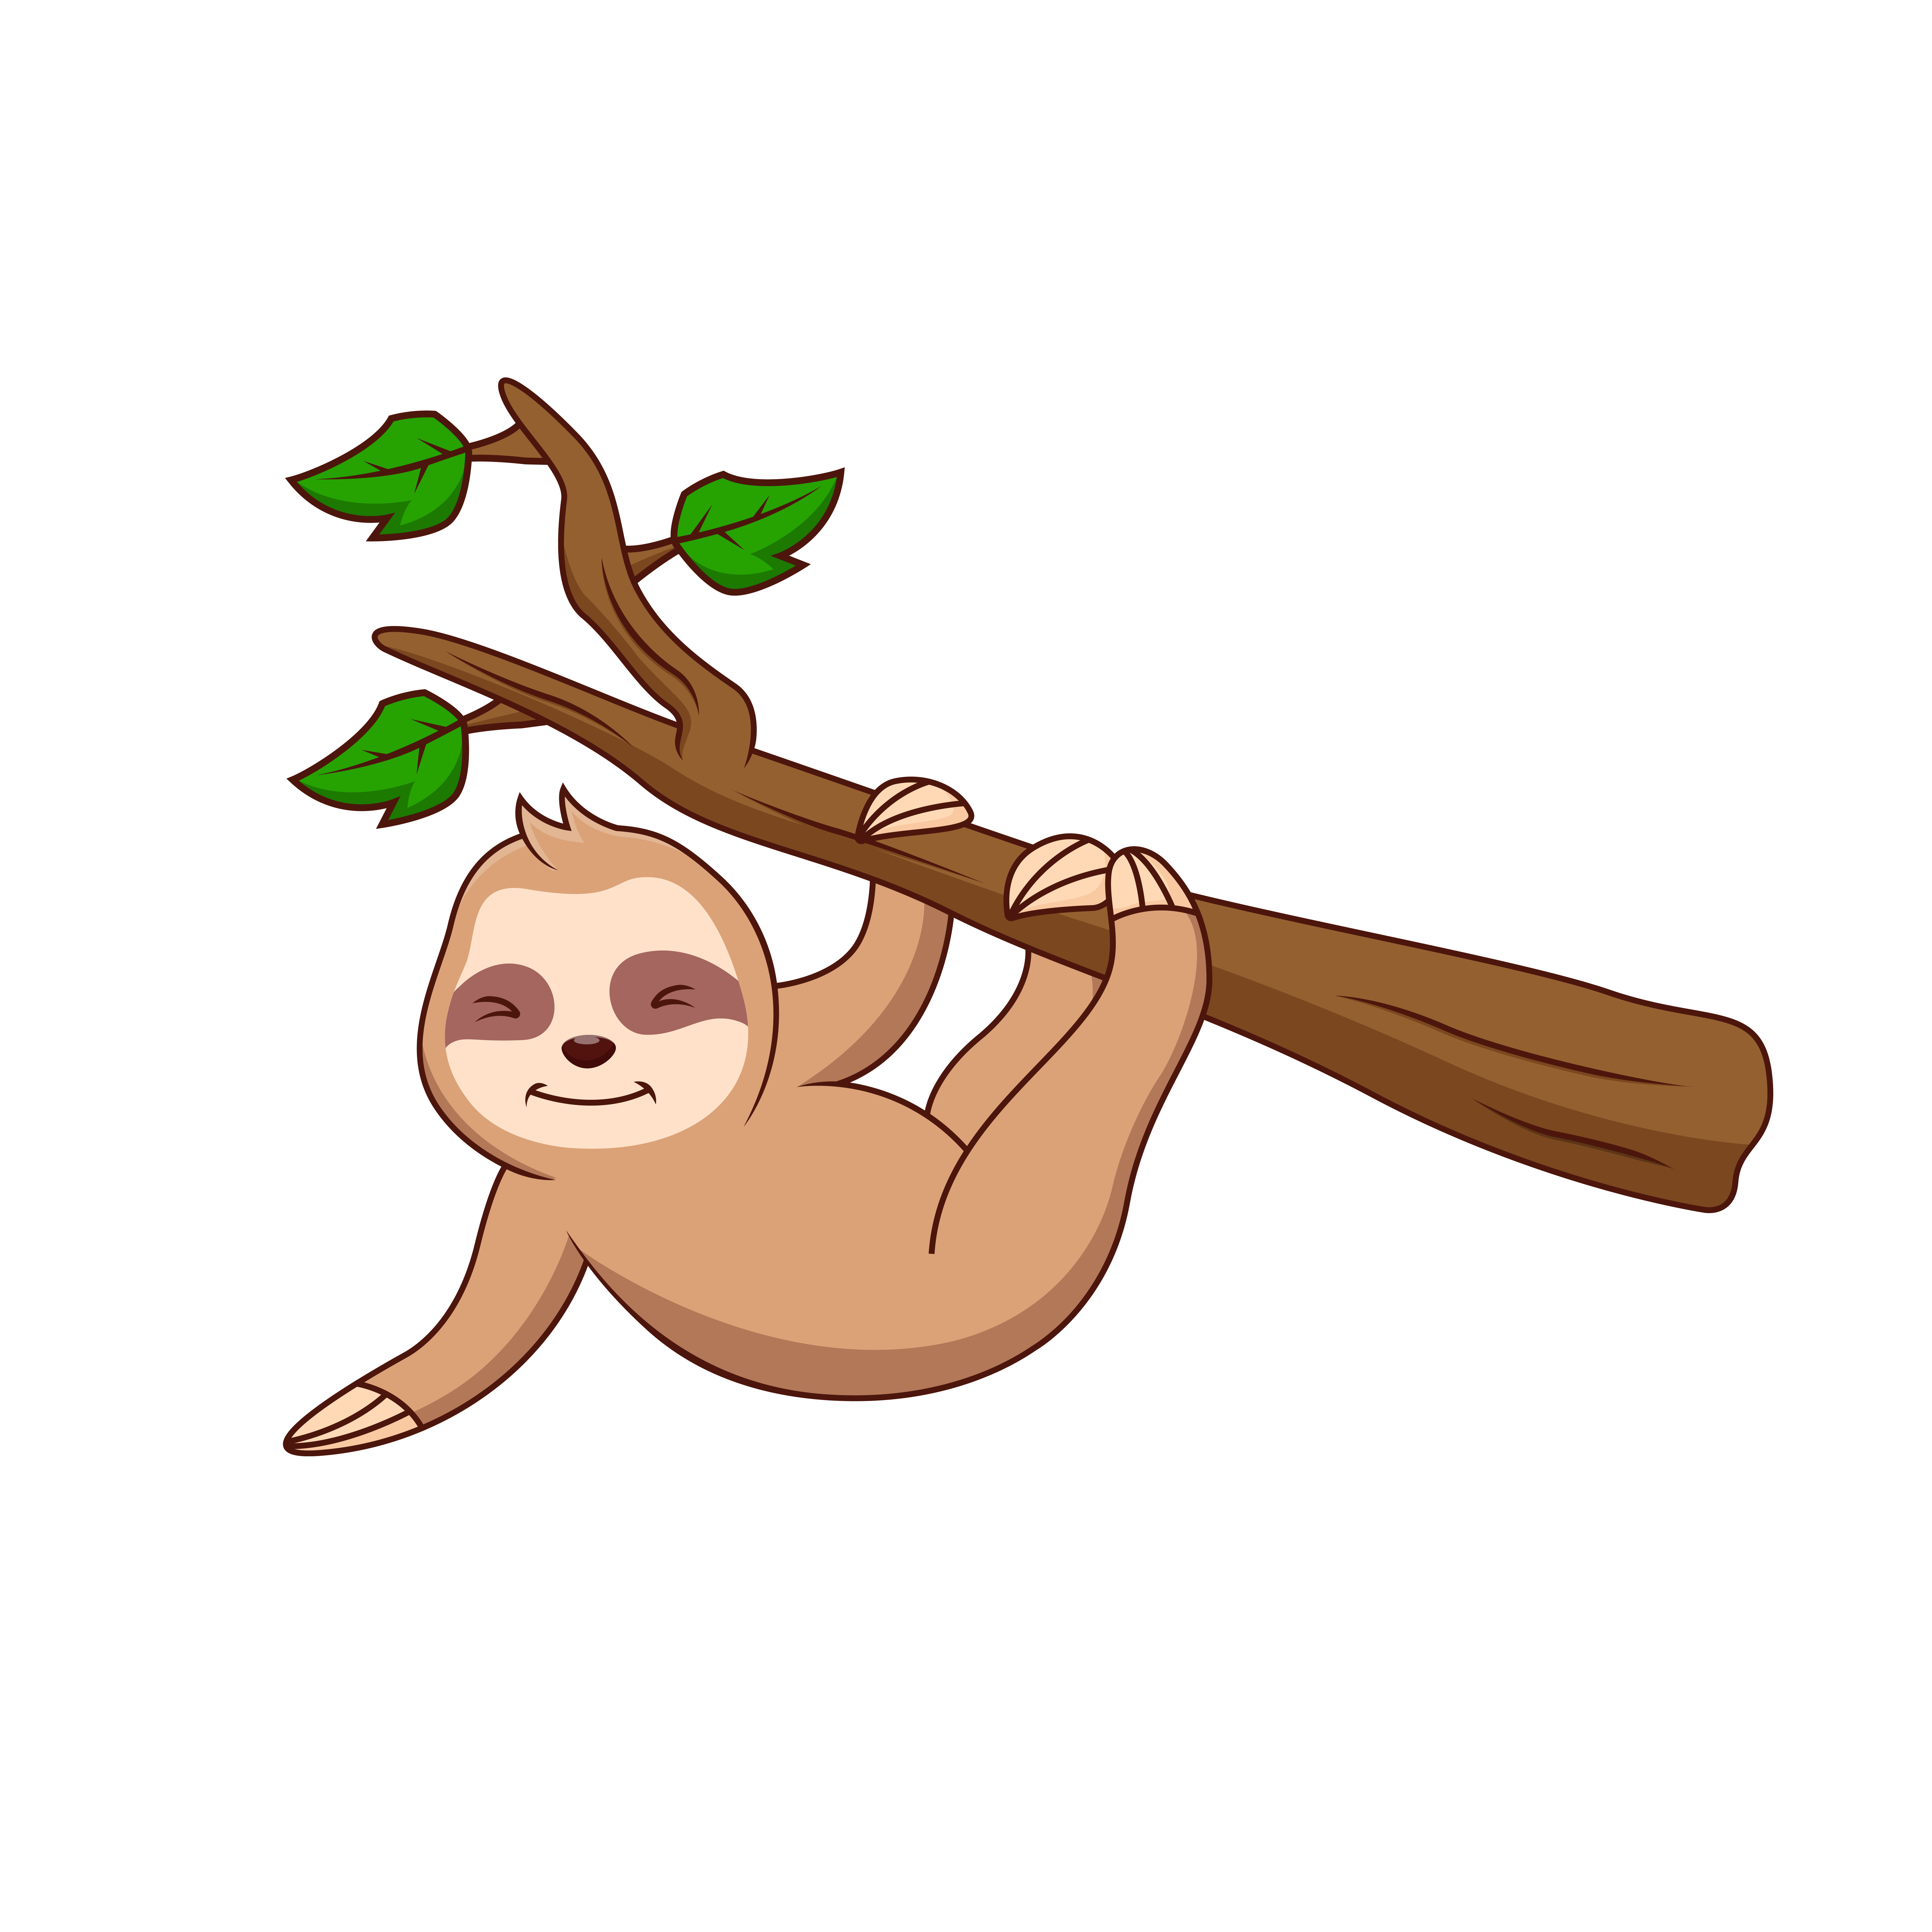 Cartoon graphic of a relaxed sloth hanging from a tree branch.